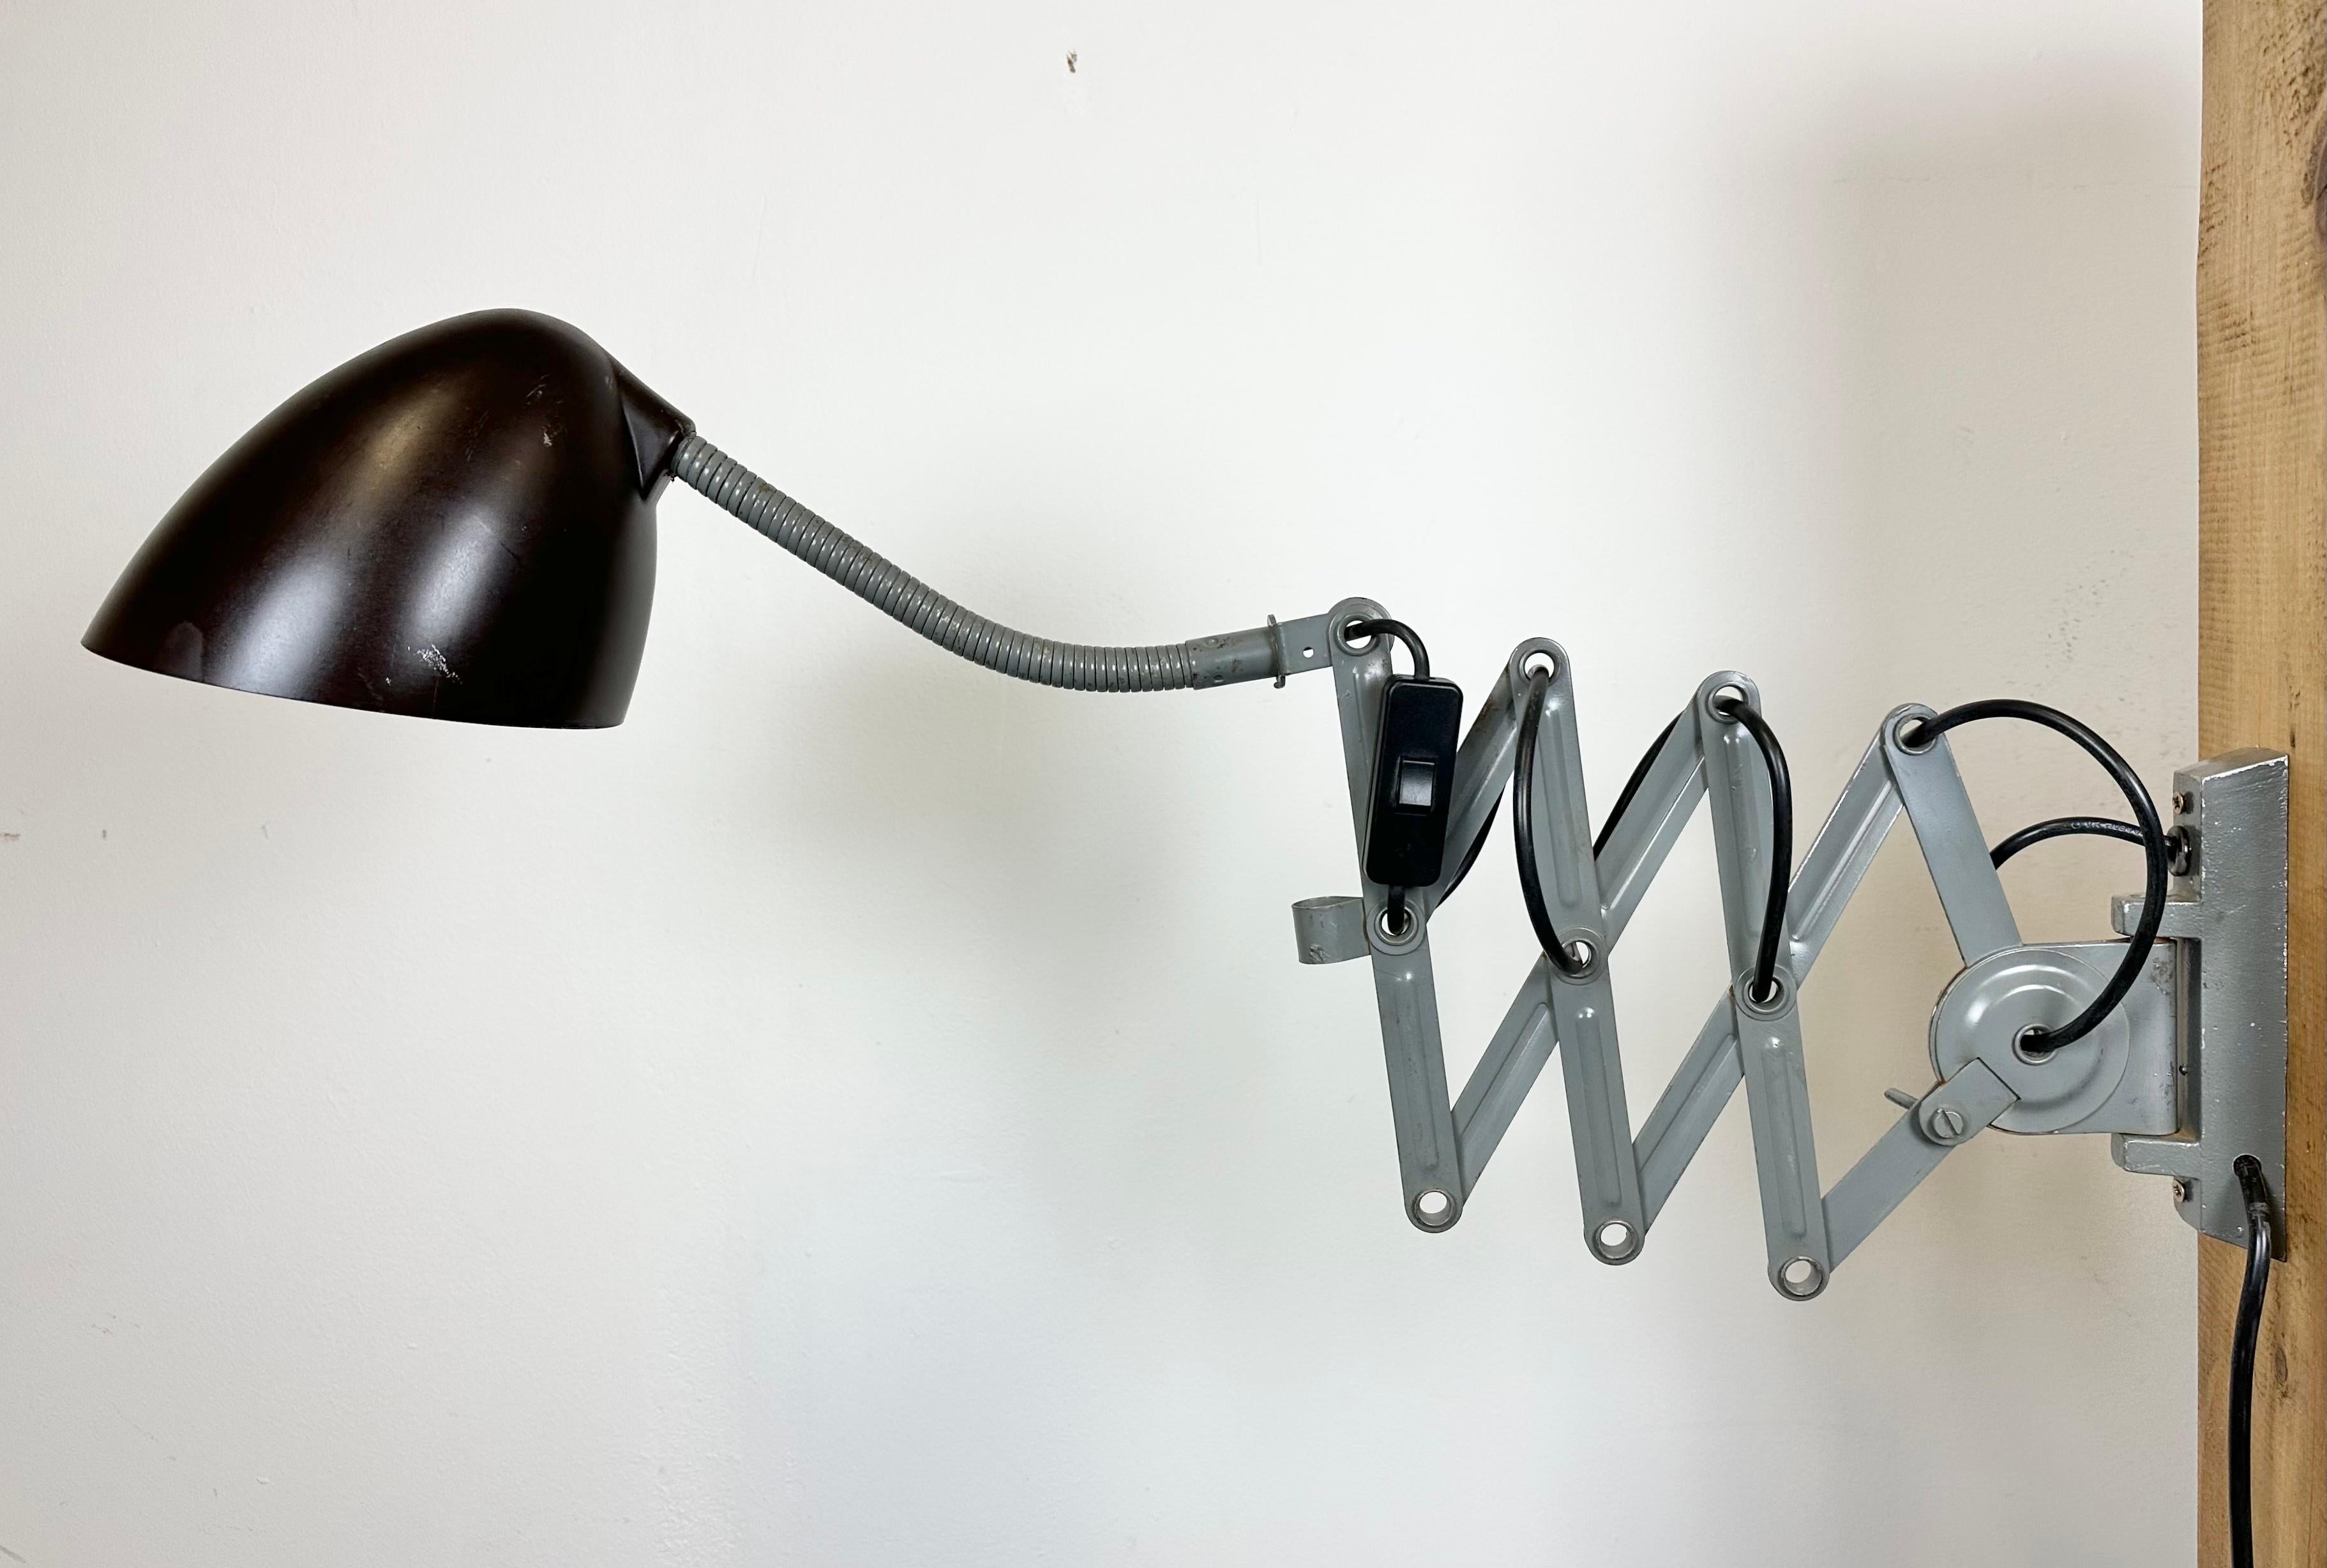 This vintage Industrial scissor wall light was produced by Elektroinstala in former Czechoslovakia during the 1960s. Lamp has a brown bakelite shade. Grey iron scissor arm is extendable and can be turned sideways. Fully functional. The original